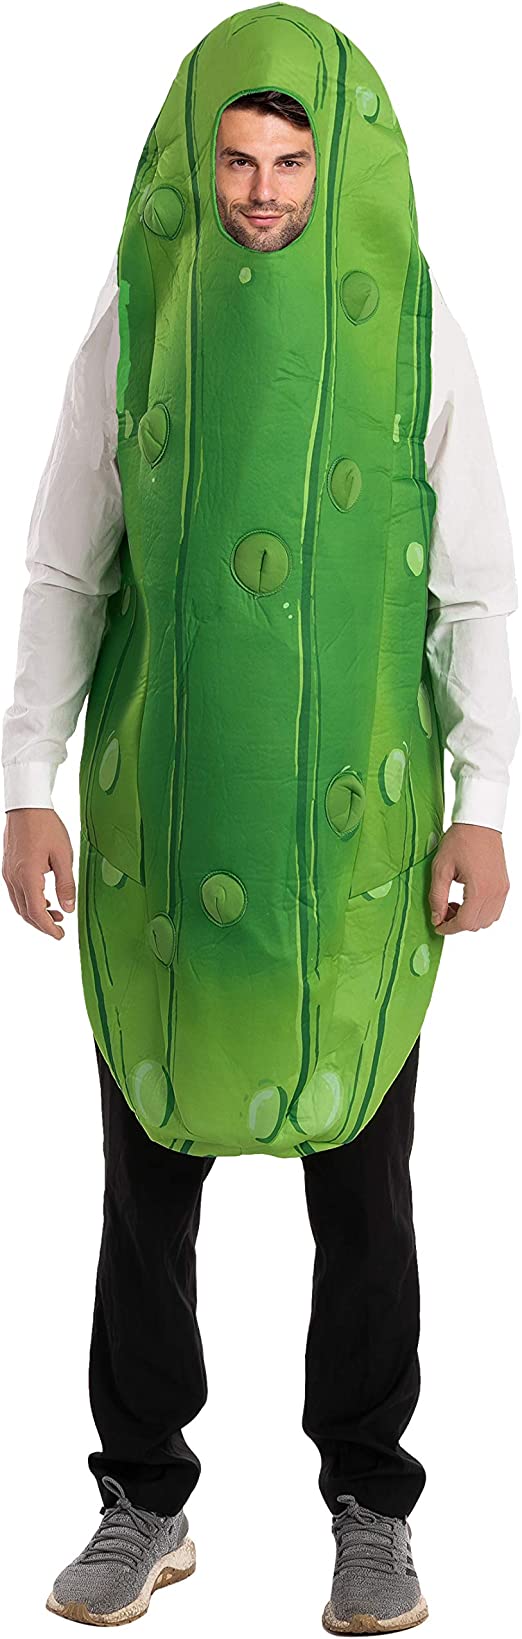 Pickle Jumpsuit Funny Costume Cosplay - Adult